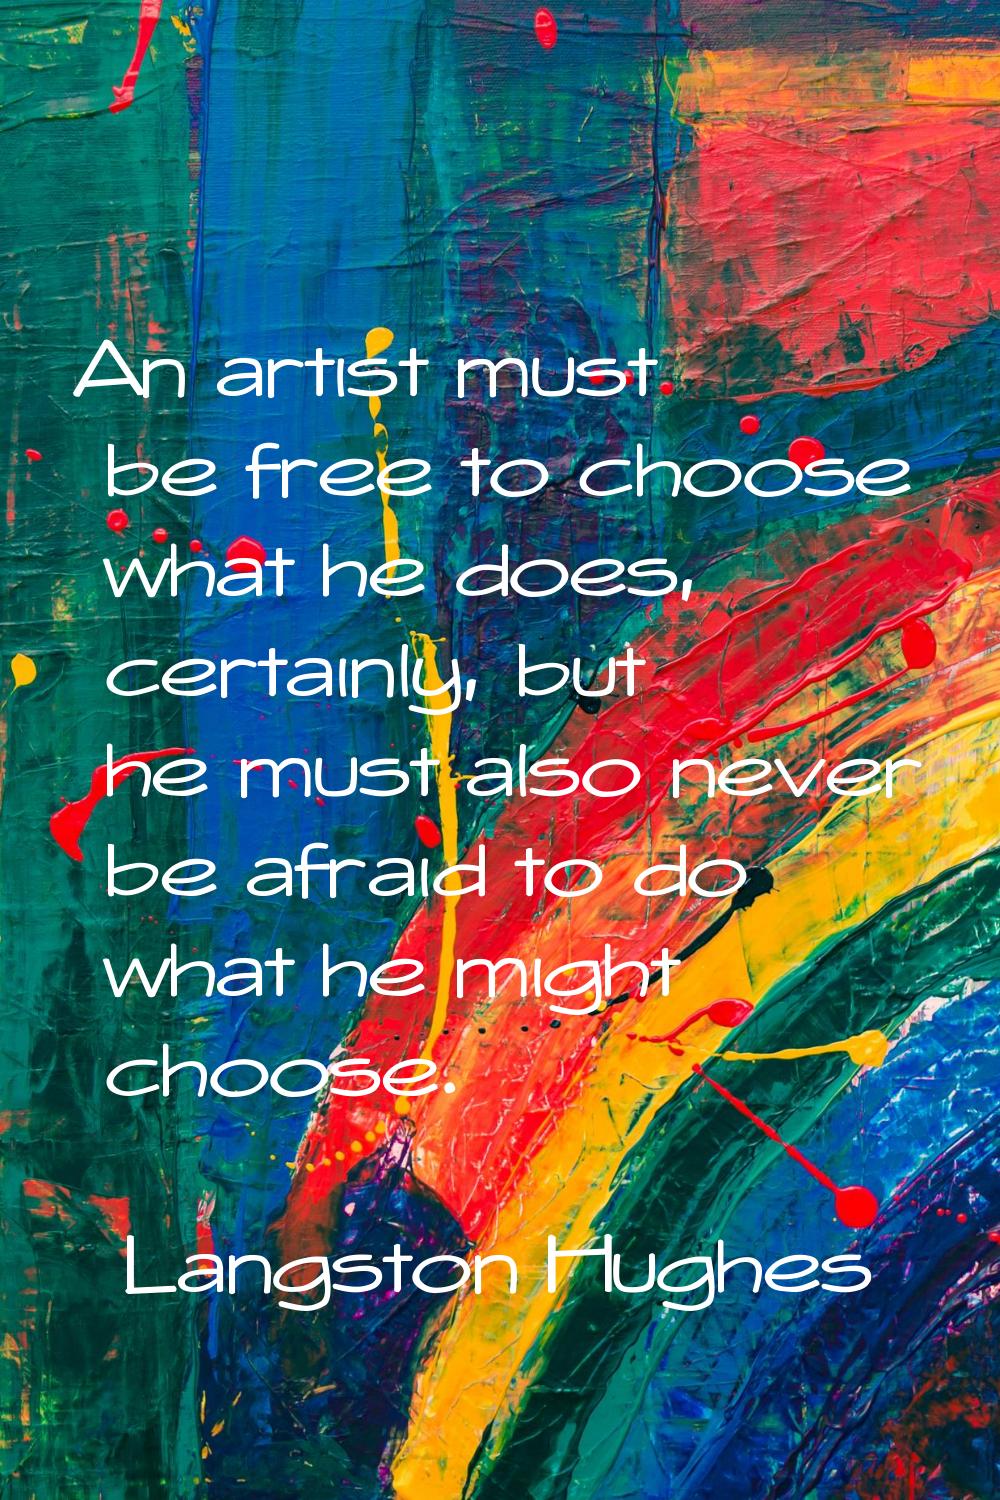 An artist must be free to choose what he does, certainly, but he must also never be afraid to do wh